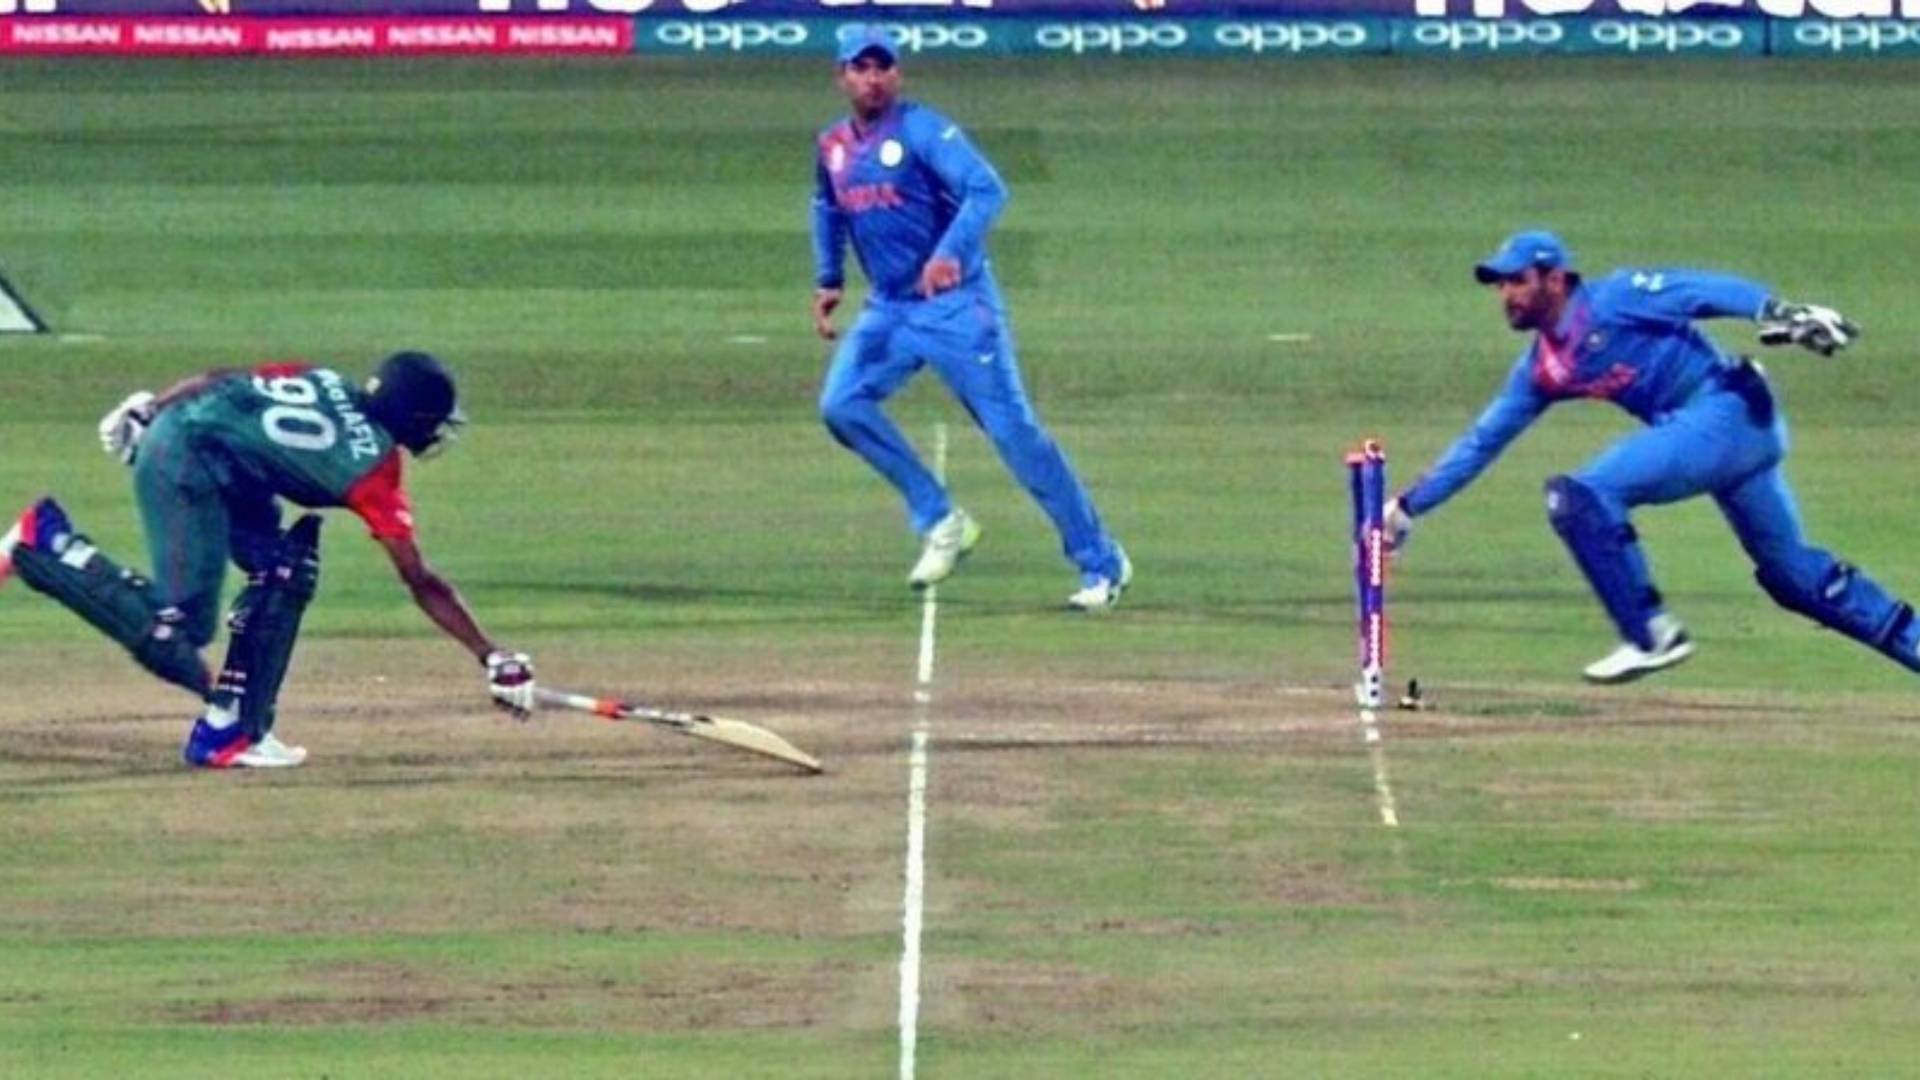 MS Dhoni's run-out of Mustafizur went viral on social media due to the speed with which he ran towards the stumps.